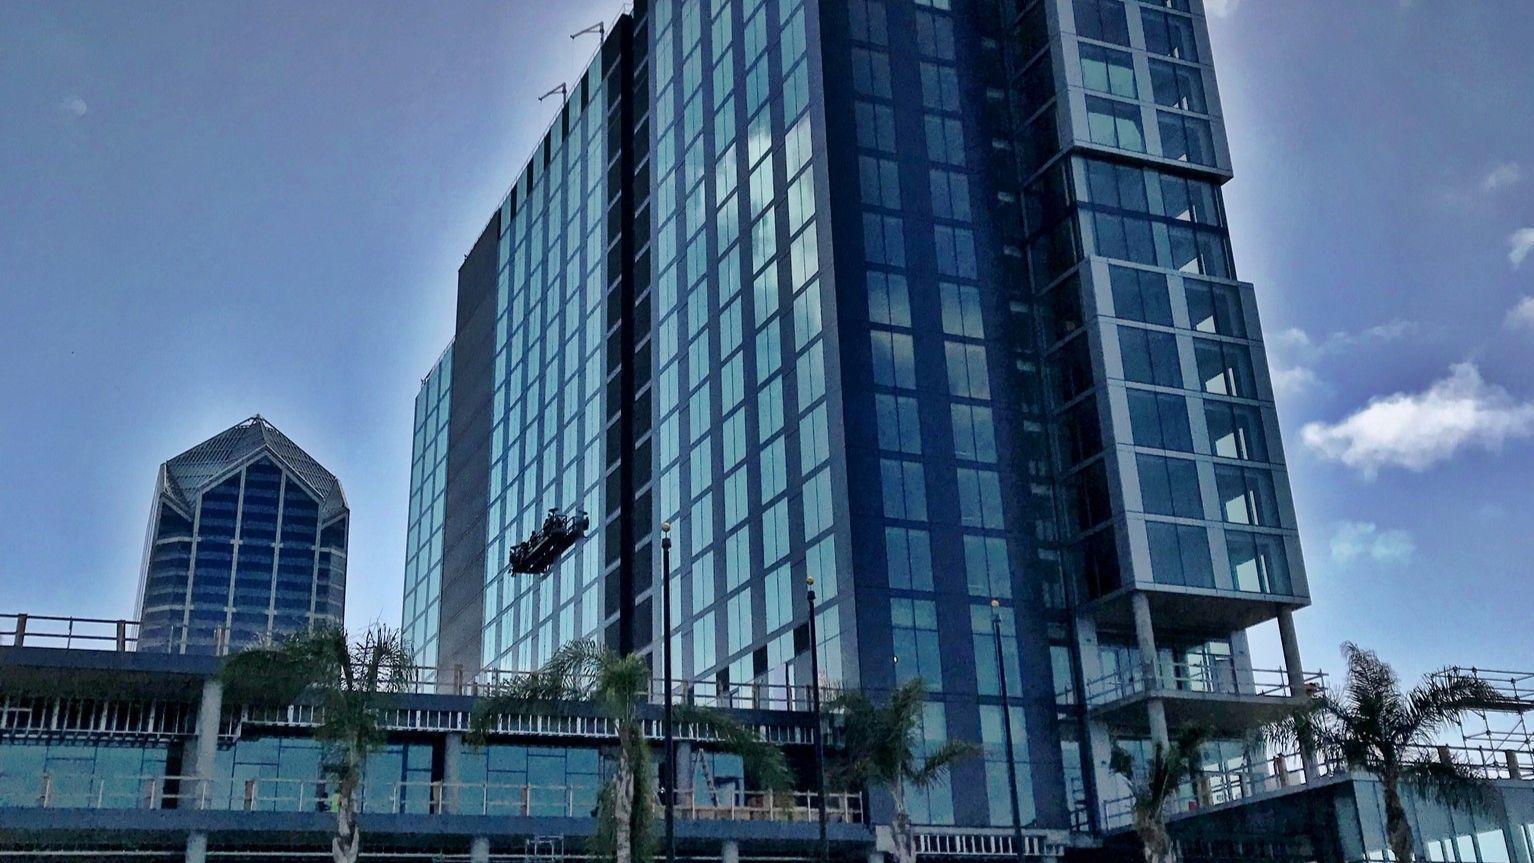 California's hotel construction sets a blistering pace